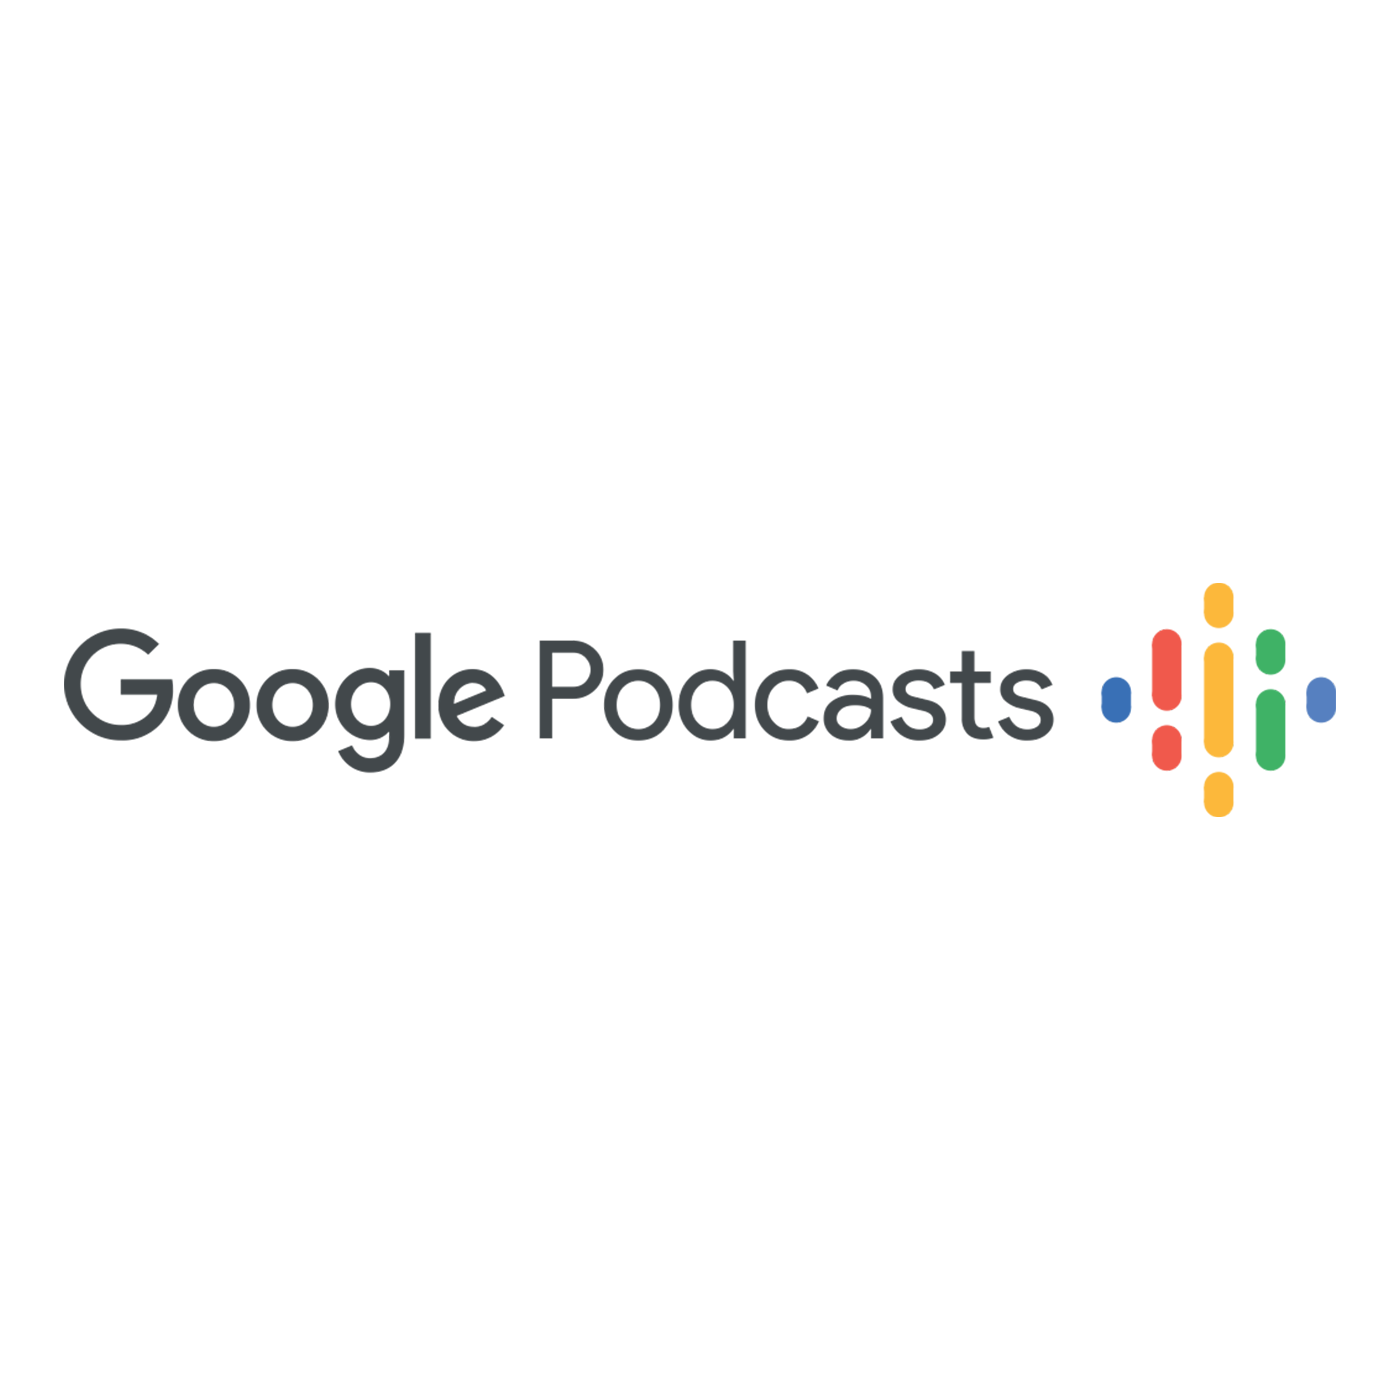 google podcasts.png